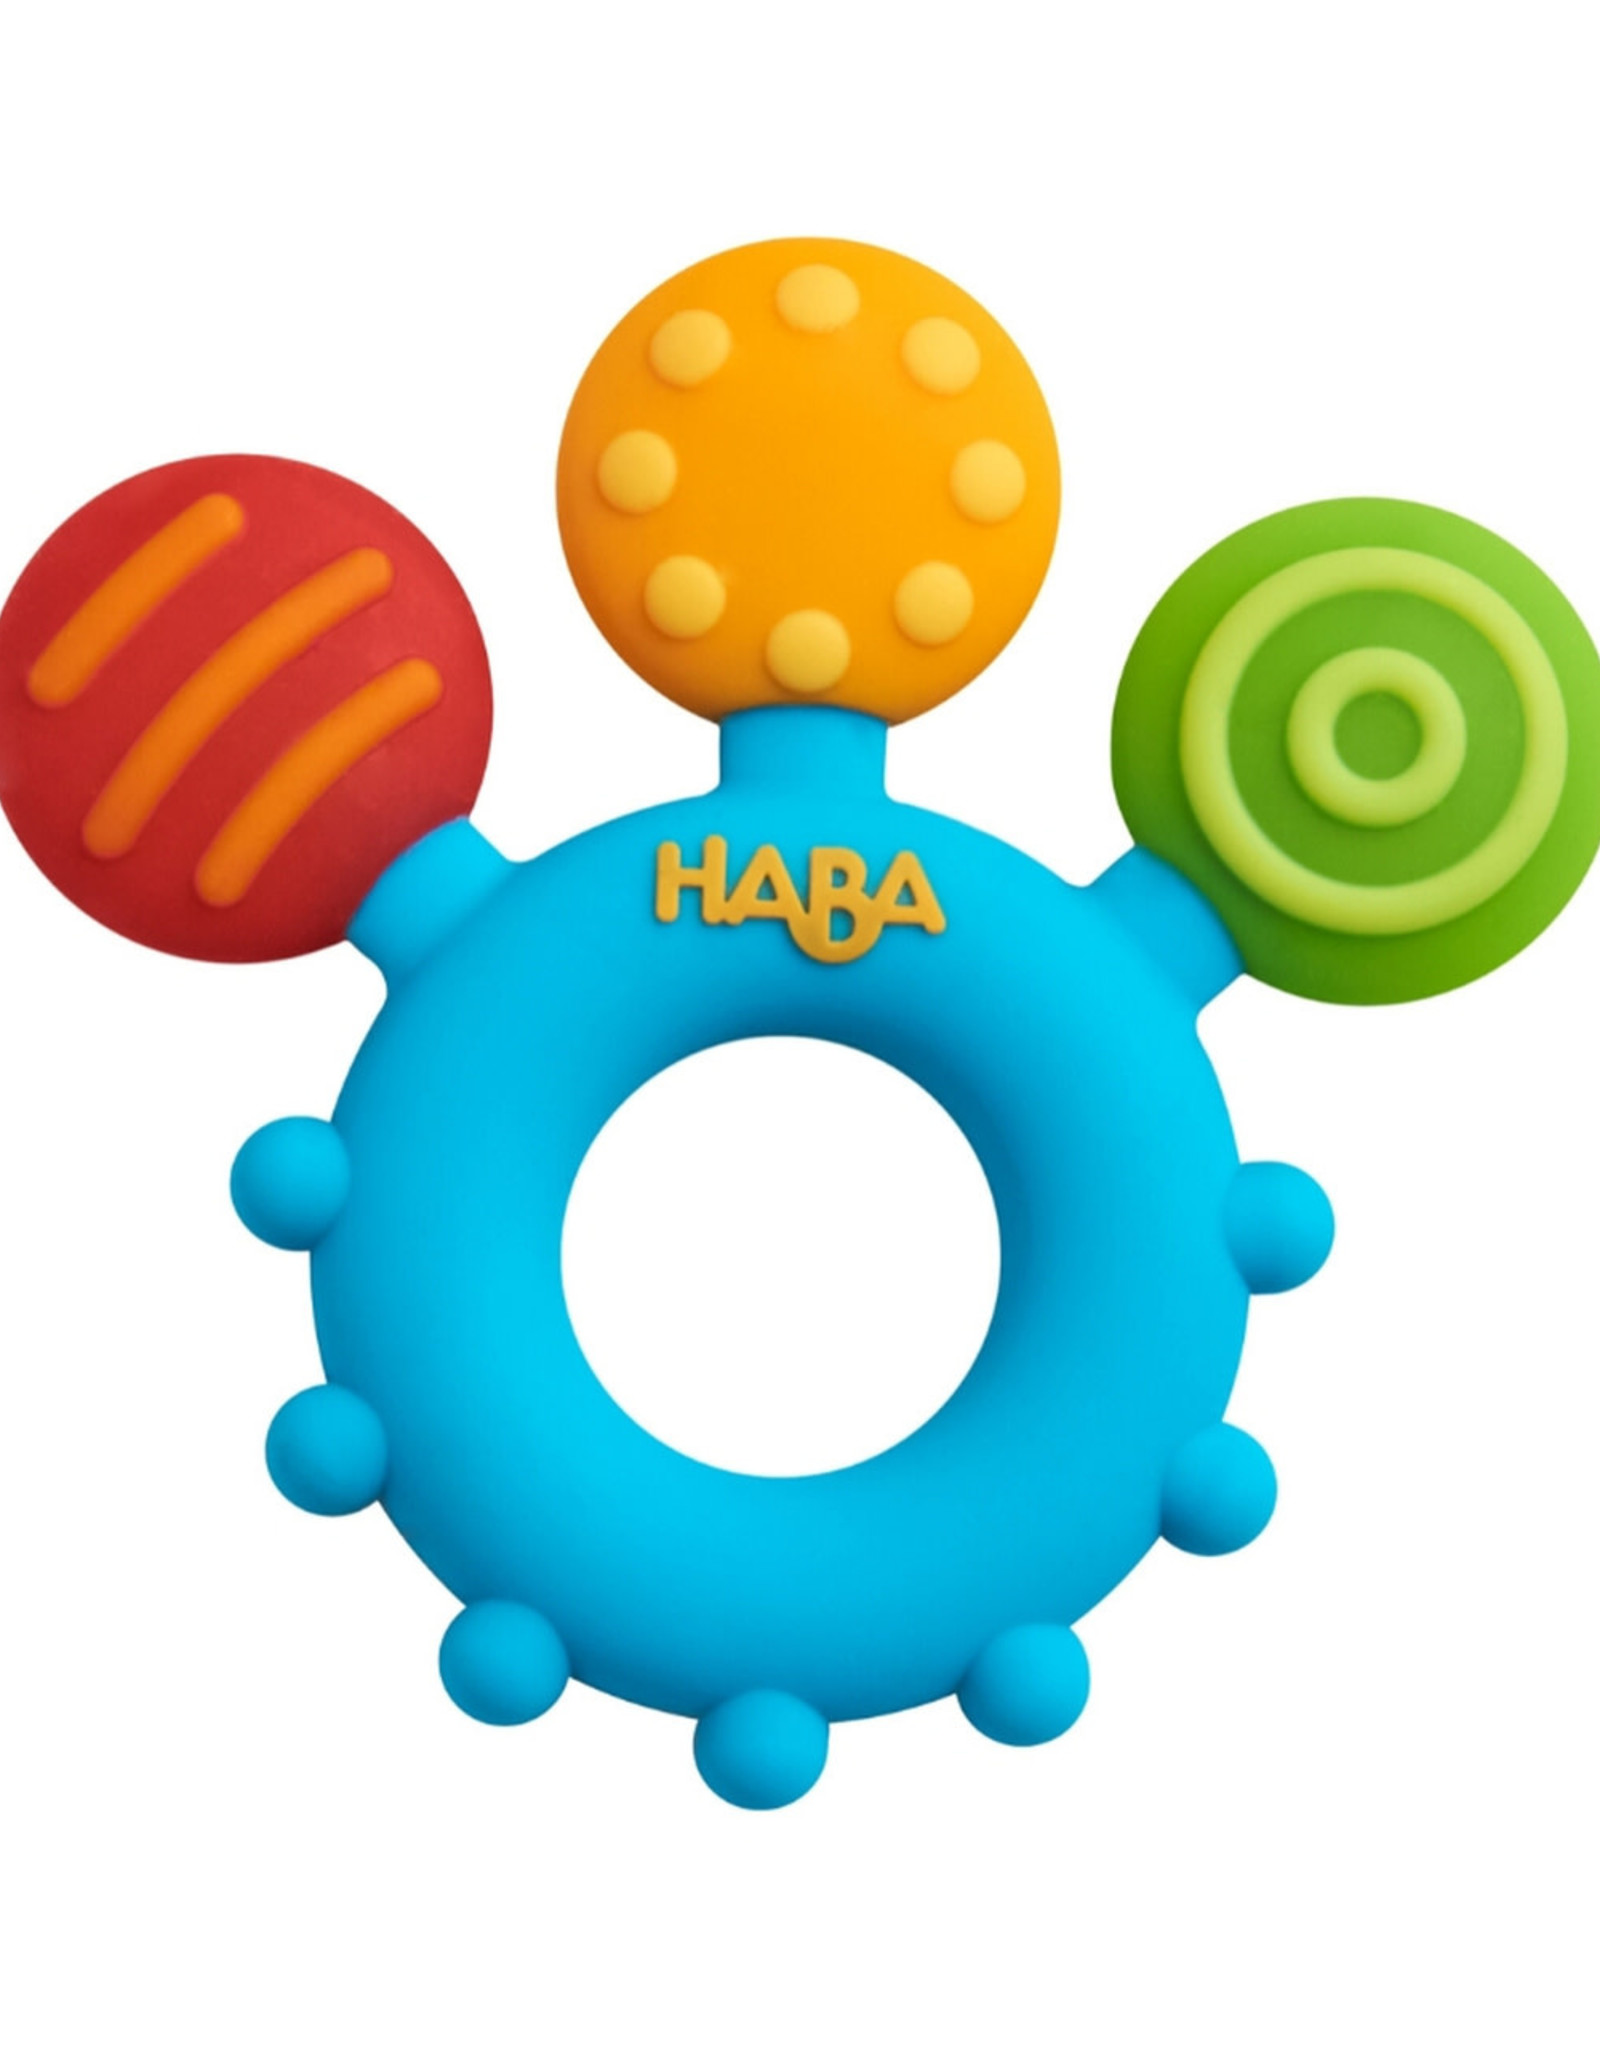 Haba Clutching Color Play Silicone Teether